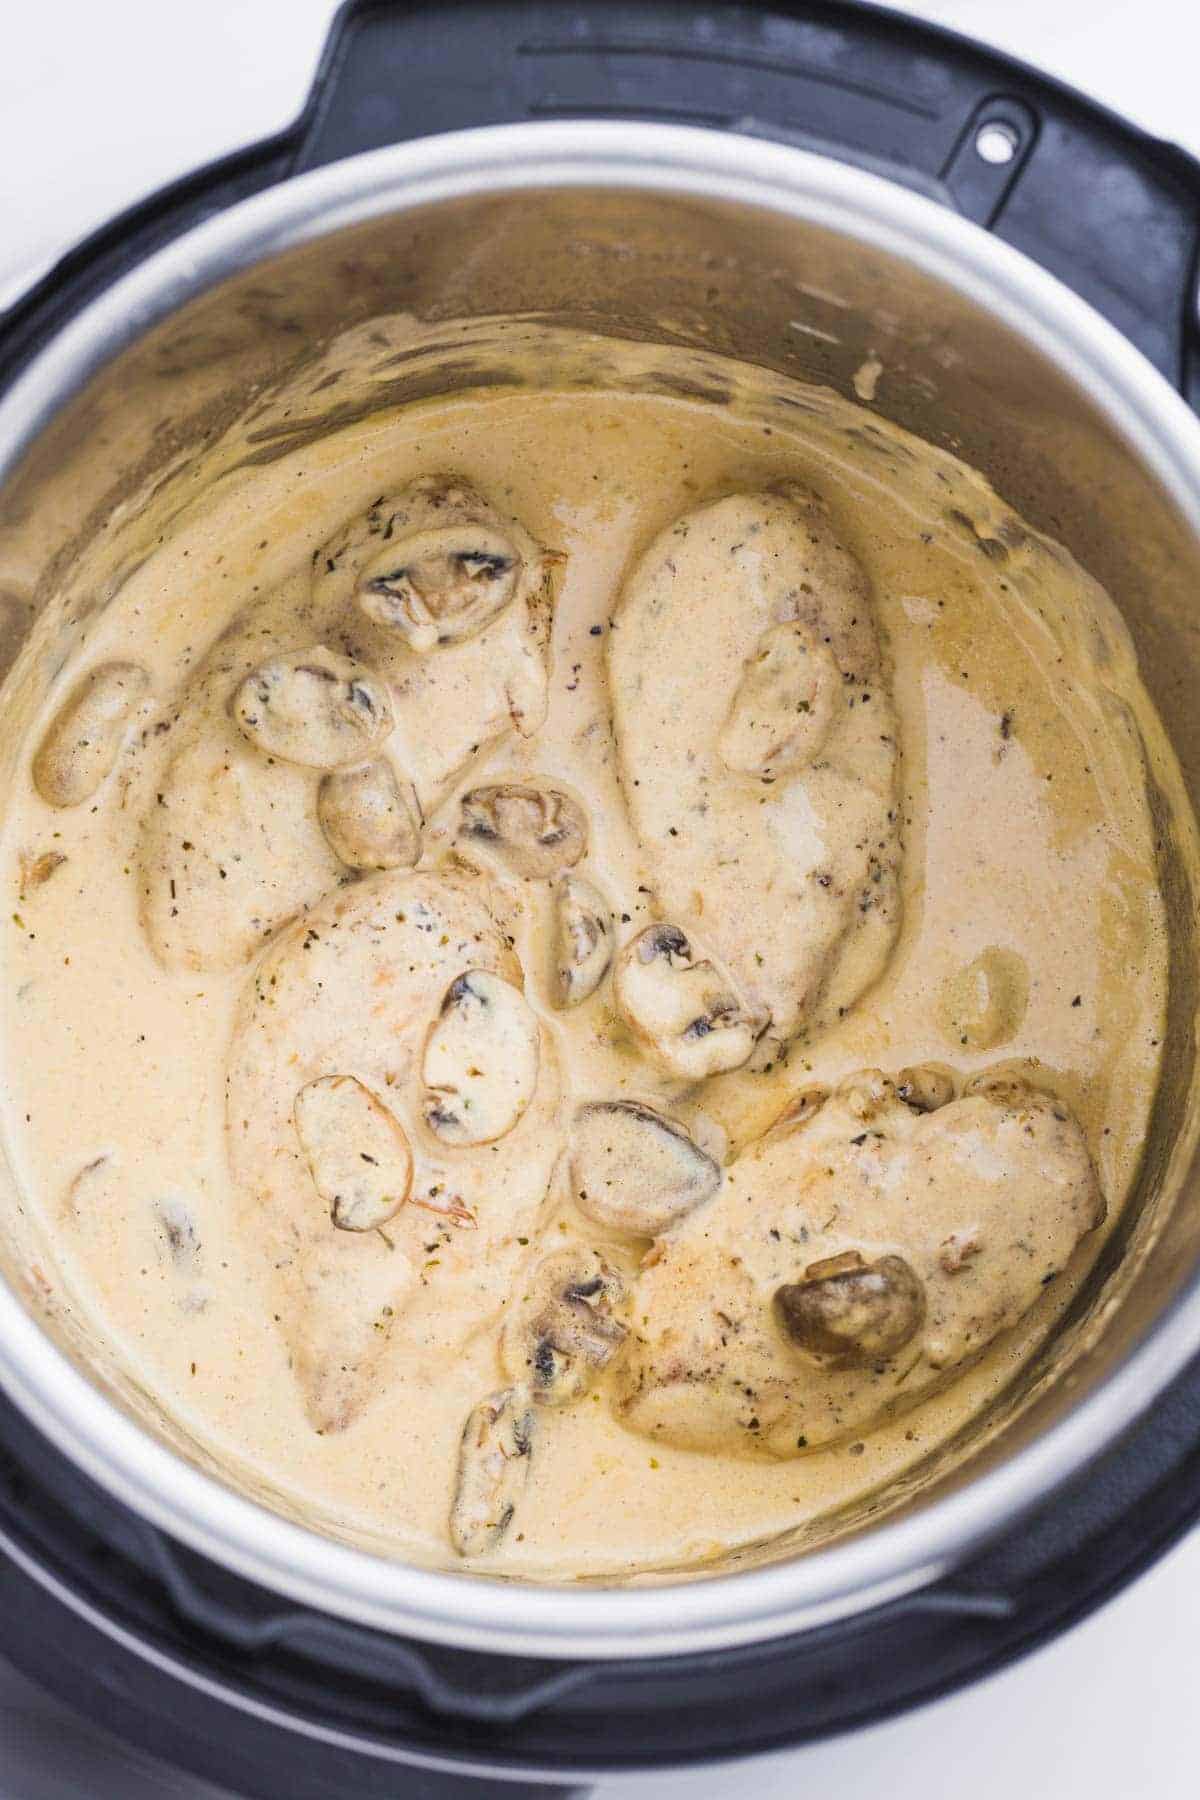 Creamy chicken and mushrooms ready in the Instant Pot